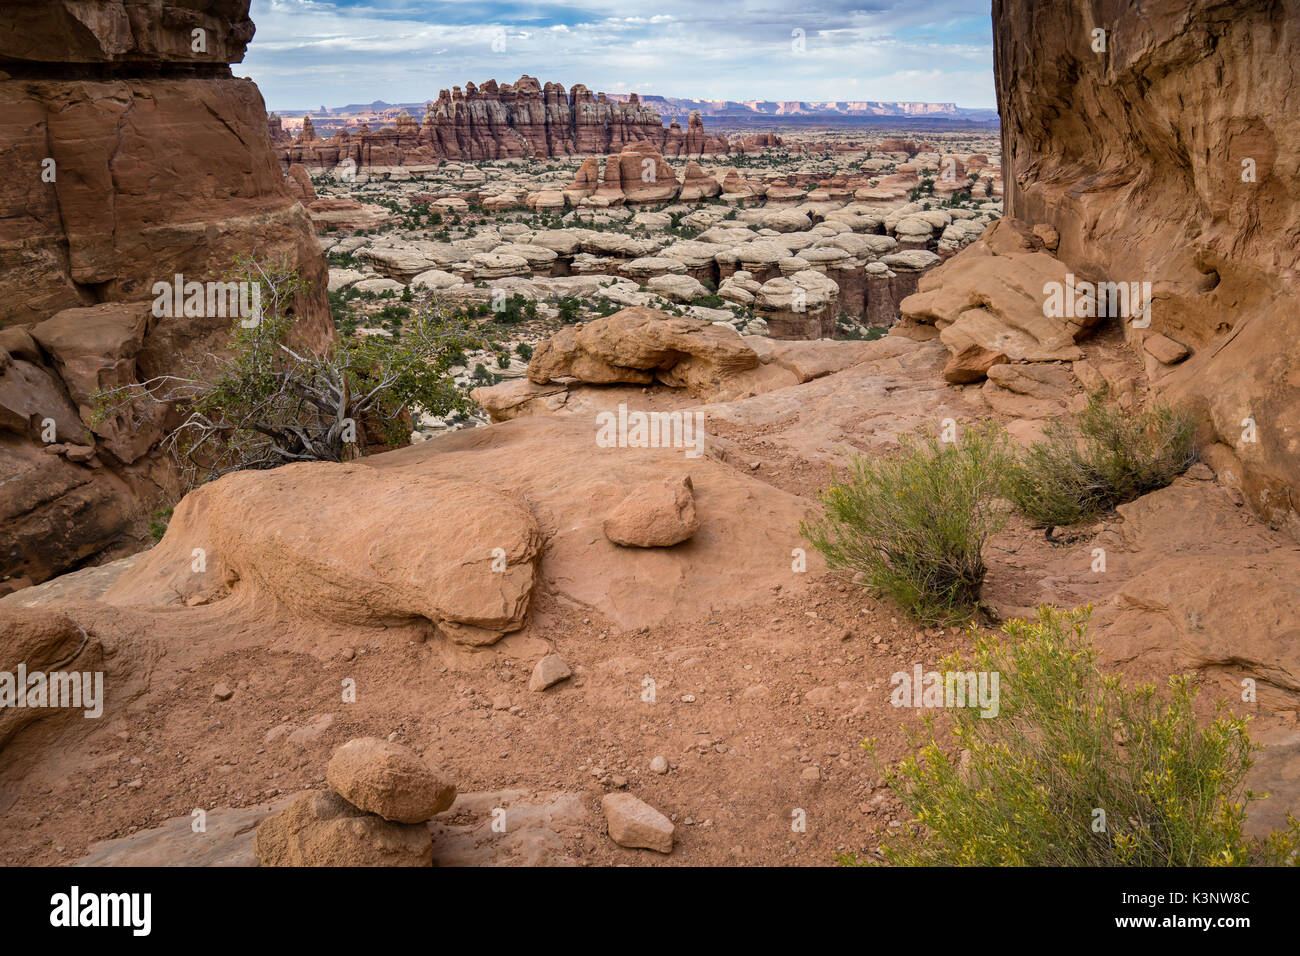 Hiking in the Needles District of Canyonlands National Park.  Moab, Utah. Stock Photo